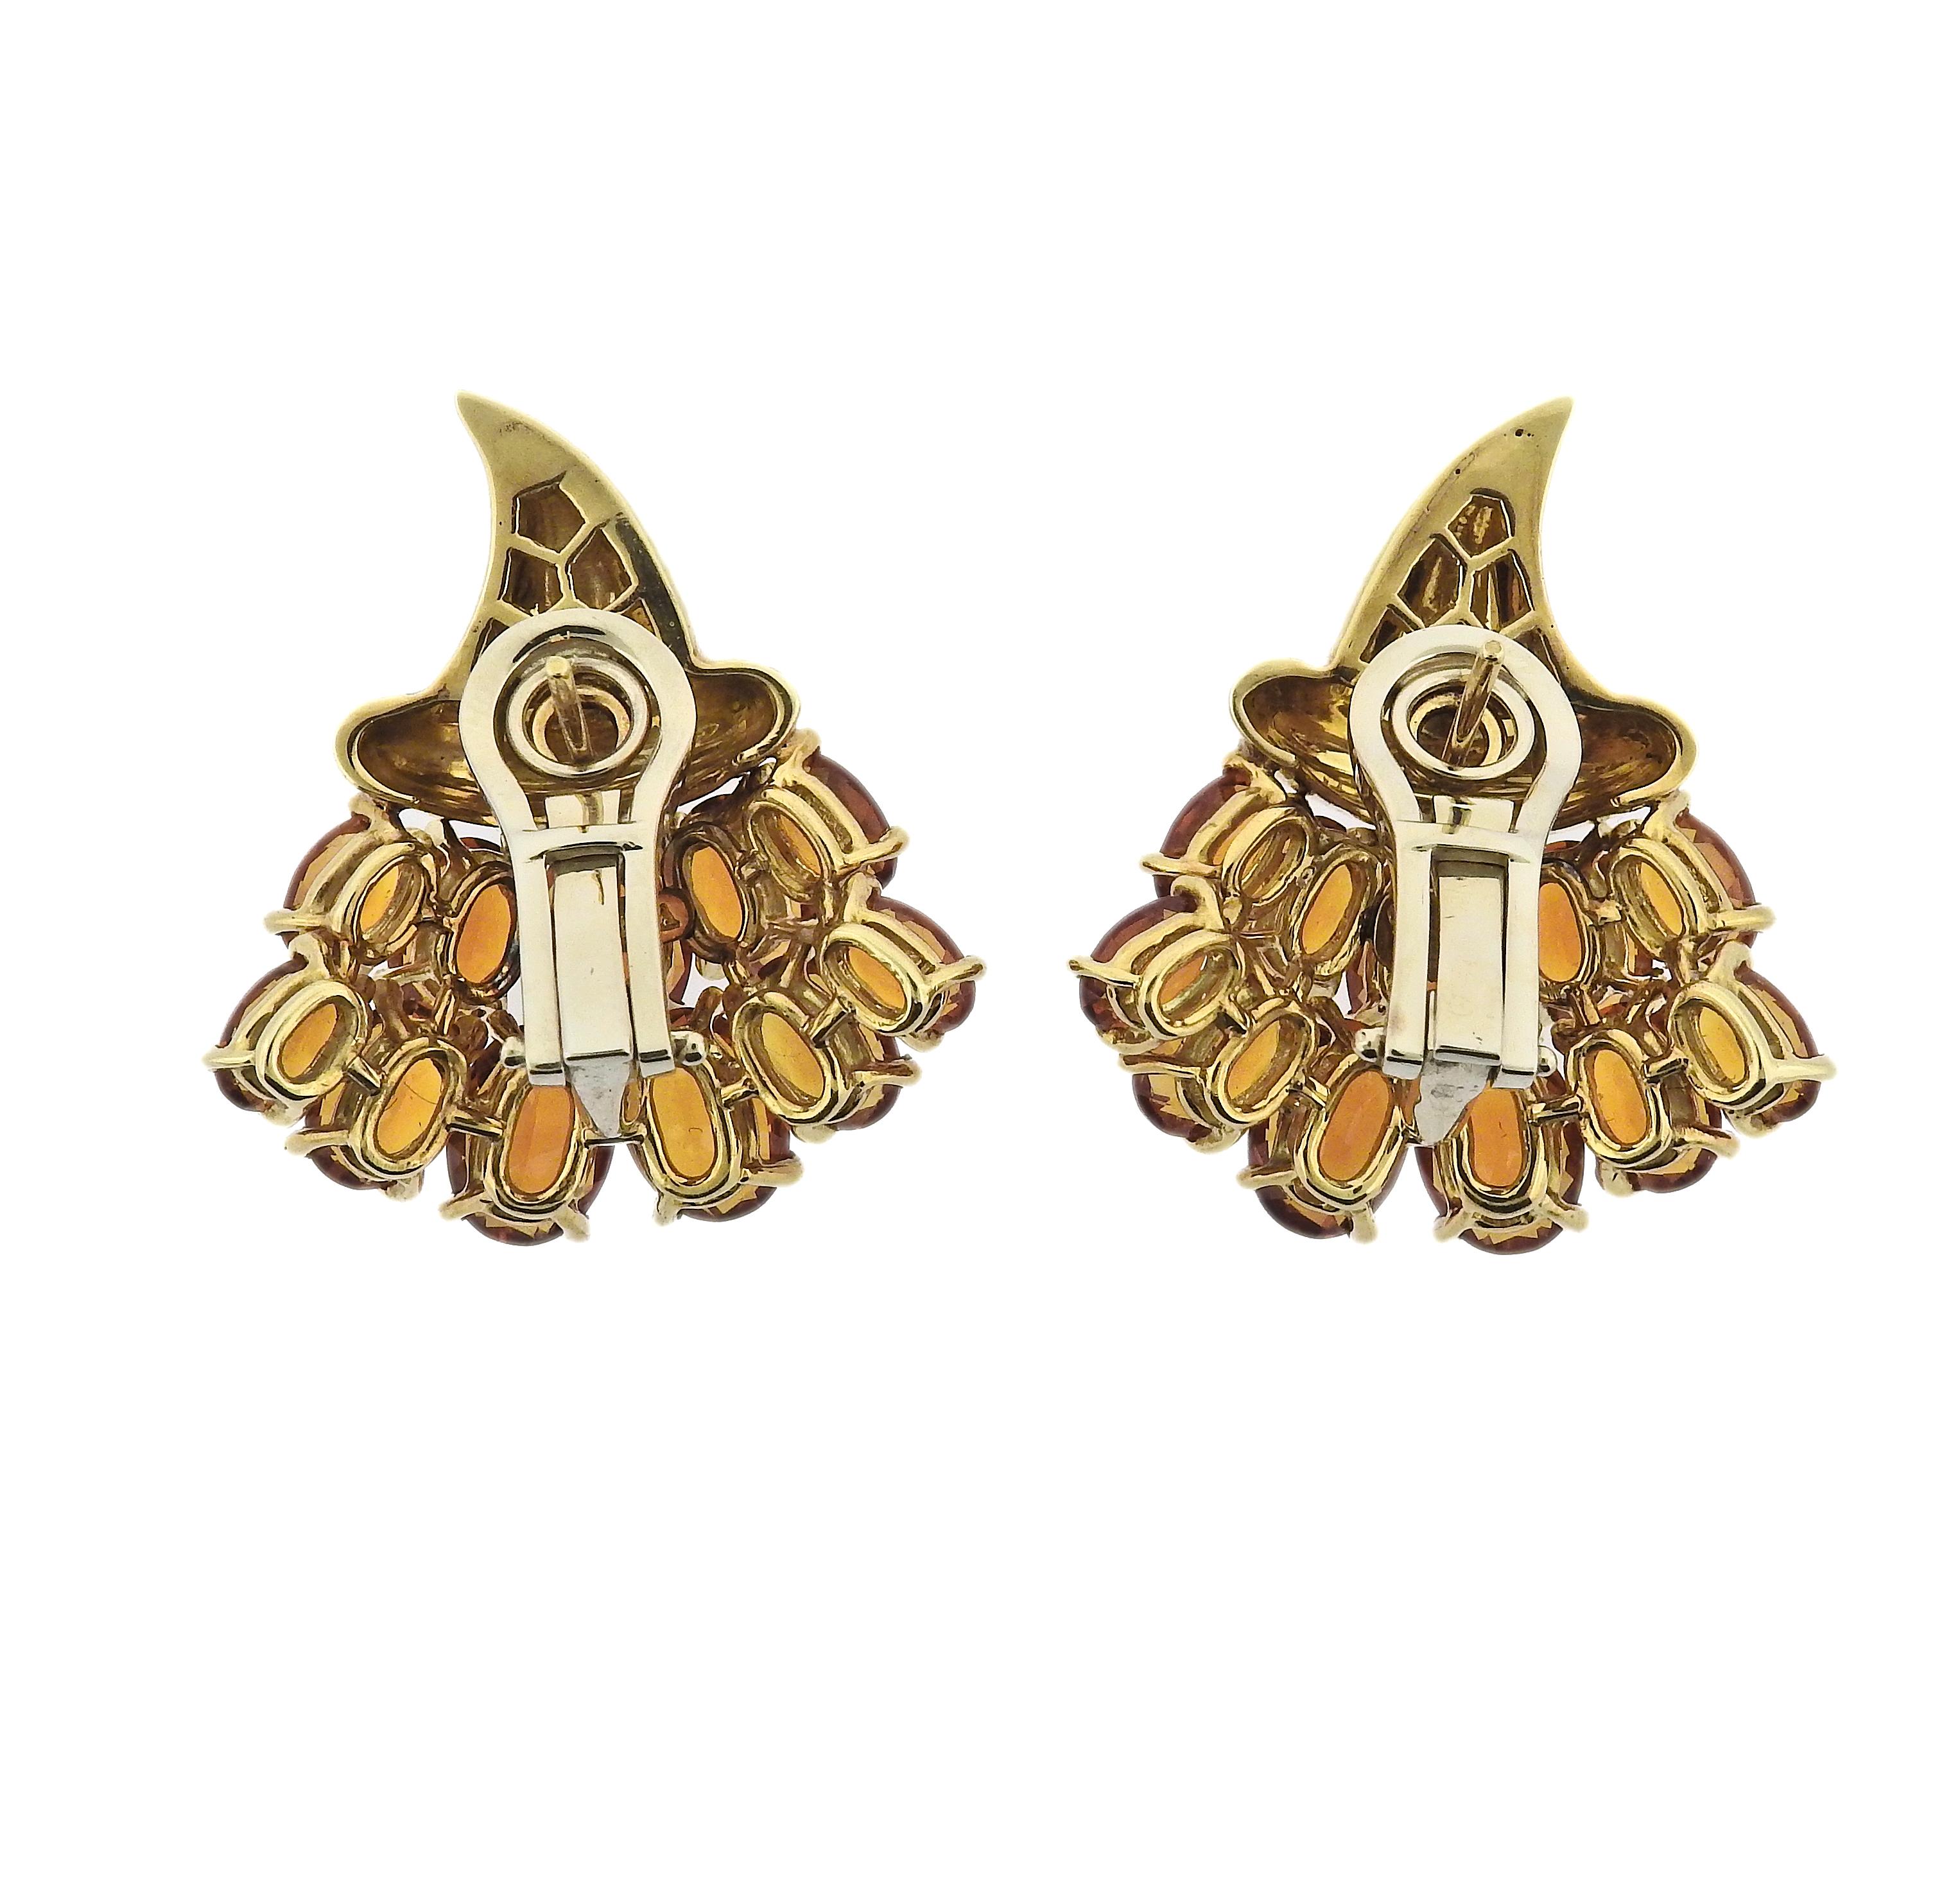 Pair of 18k gold Verdura Cornucopia earrings with citrines. Come with box.  Earrings are 30mm x 28mm. Marked: 750, Italian maker's mark (1006 NA), Verdura. Weight: 25 grams.